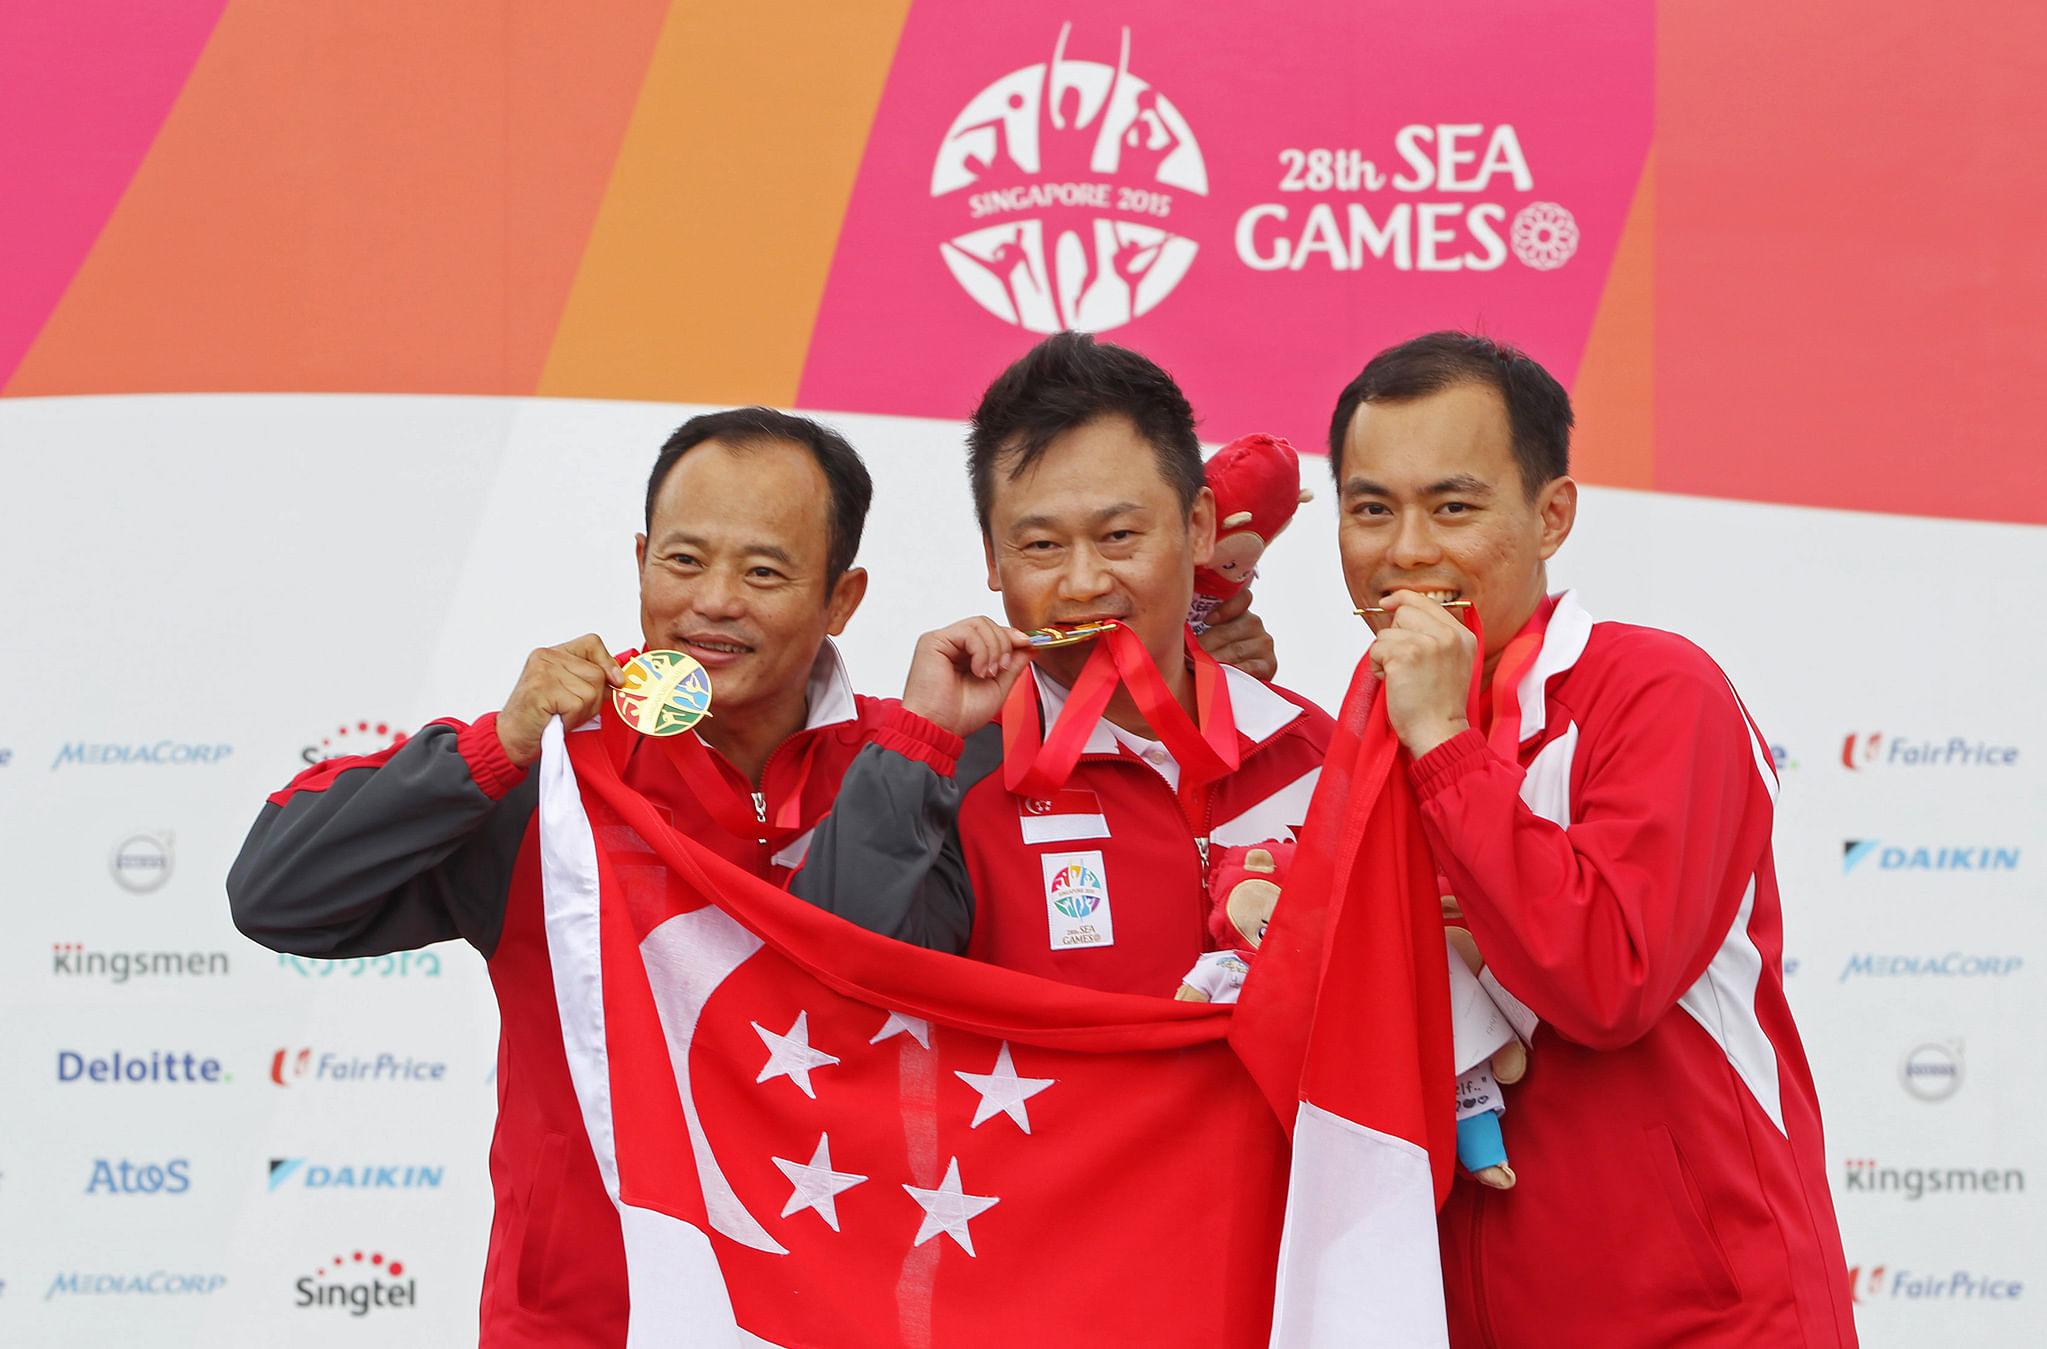 28th SEA Games Singapore 2015 - National Shooting Centre, Singapore - 11/6/15. Shooting - Men's 50m Pistol Team - Final - Singapore's Gai Bin, Lim Swee Hon and Poh Lip Meng celebrate with their gold medals on the podium. SEAGAMES28 TEAMSINGAPORE. Mandator